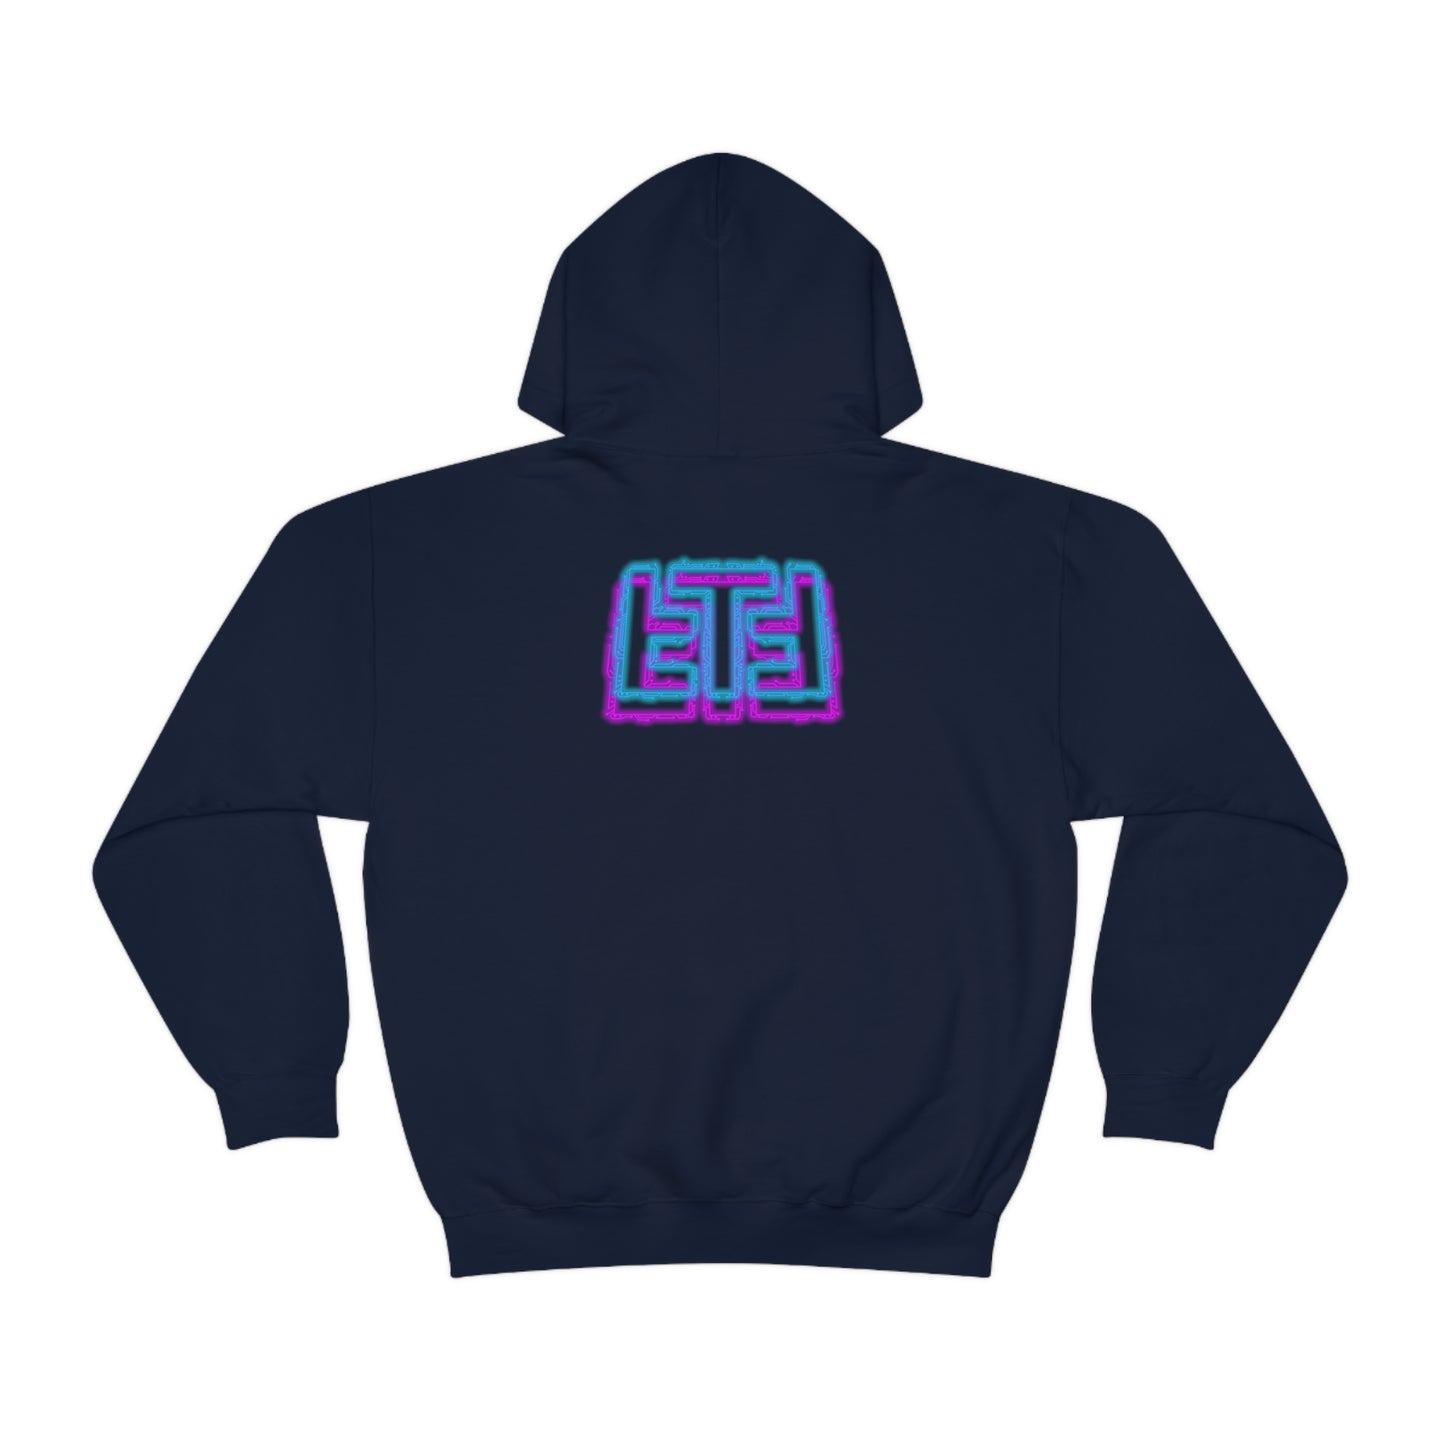 Tabletop Time Cyberpunk Pull Over Hoodie